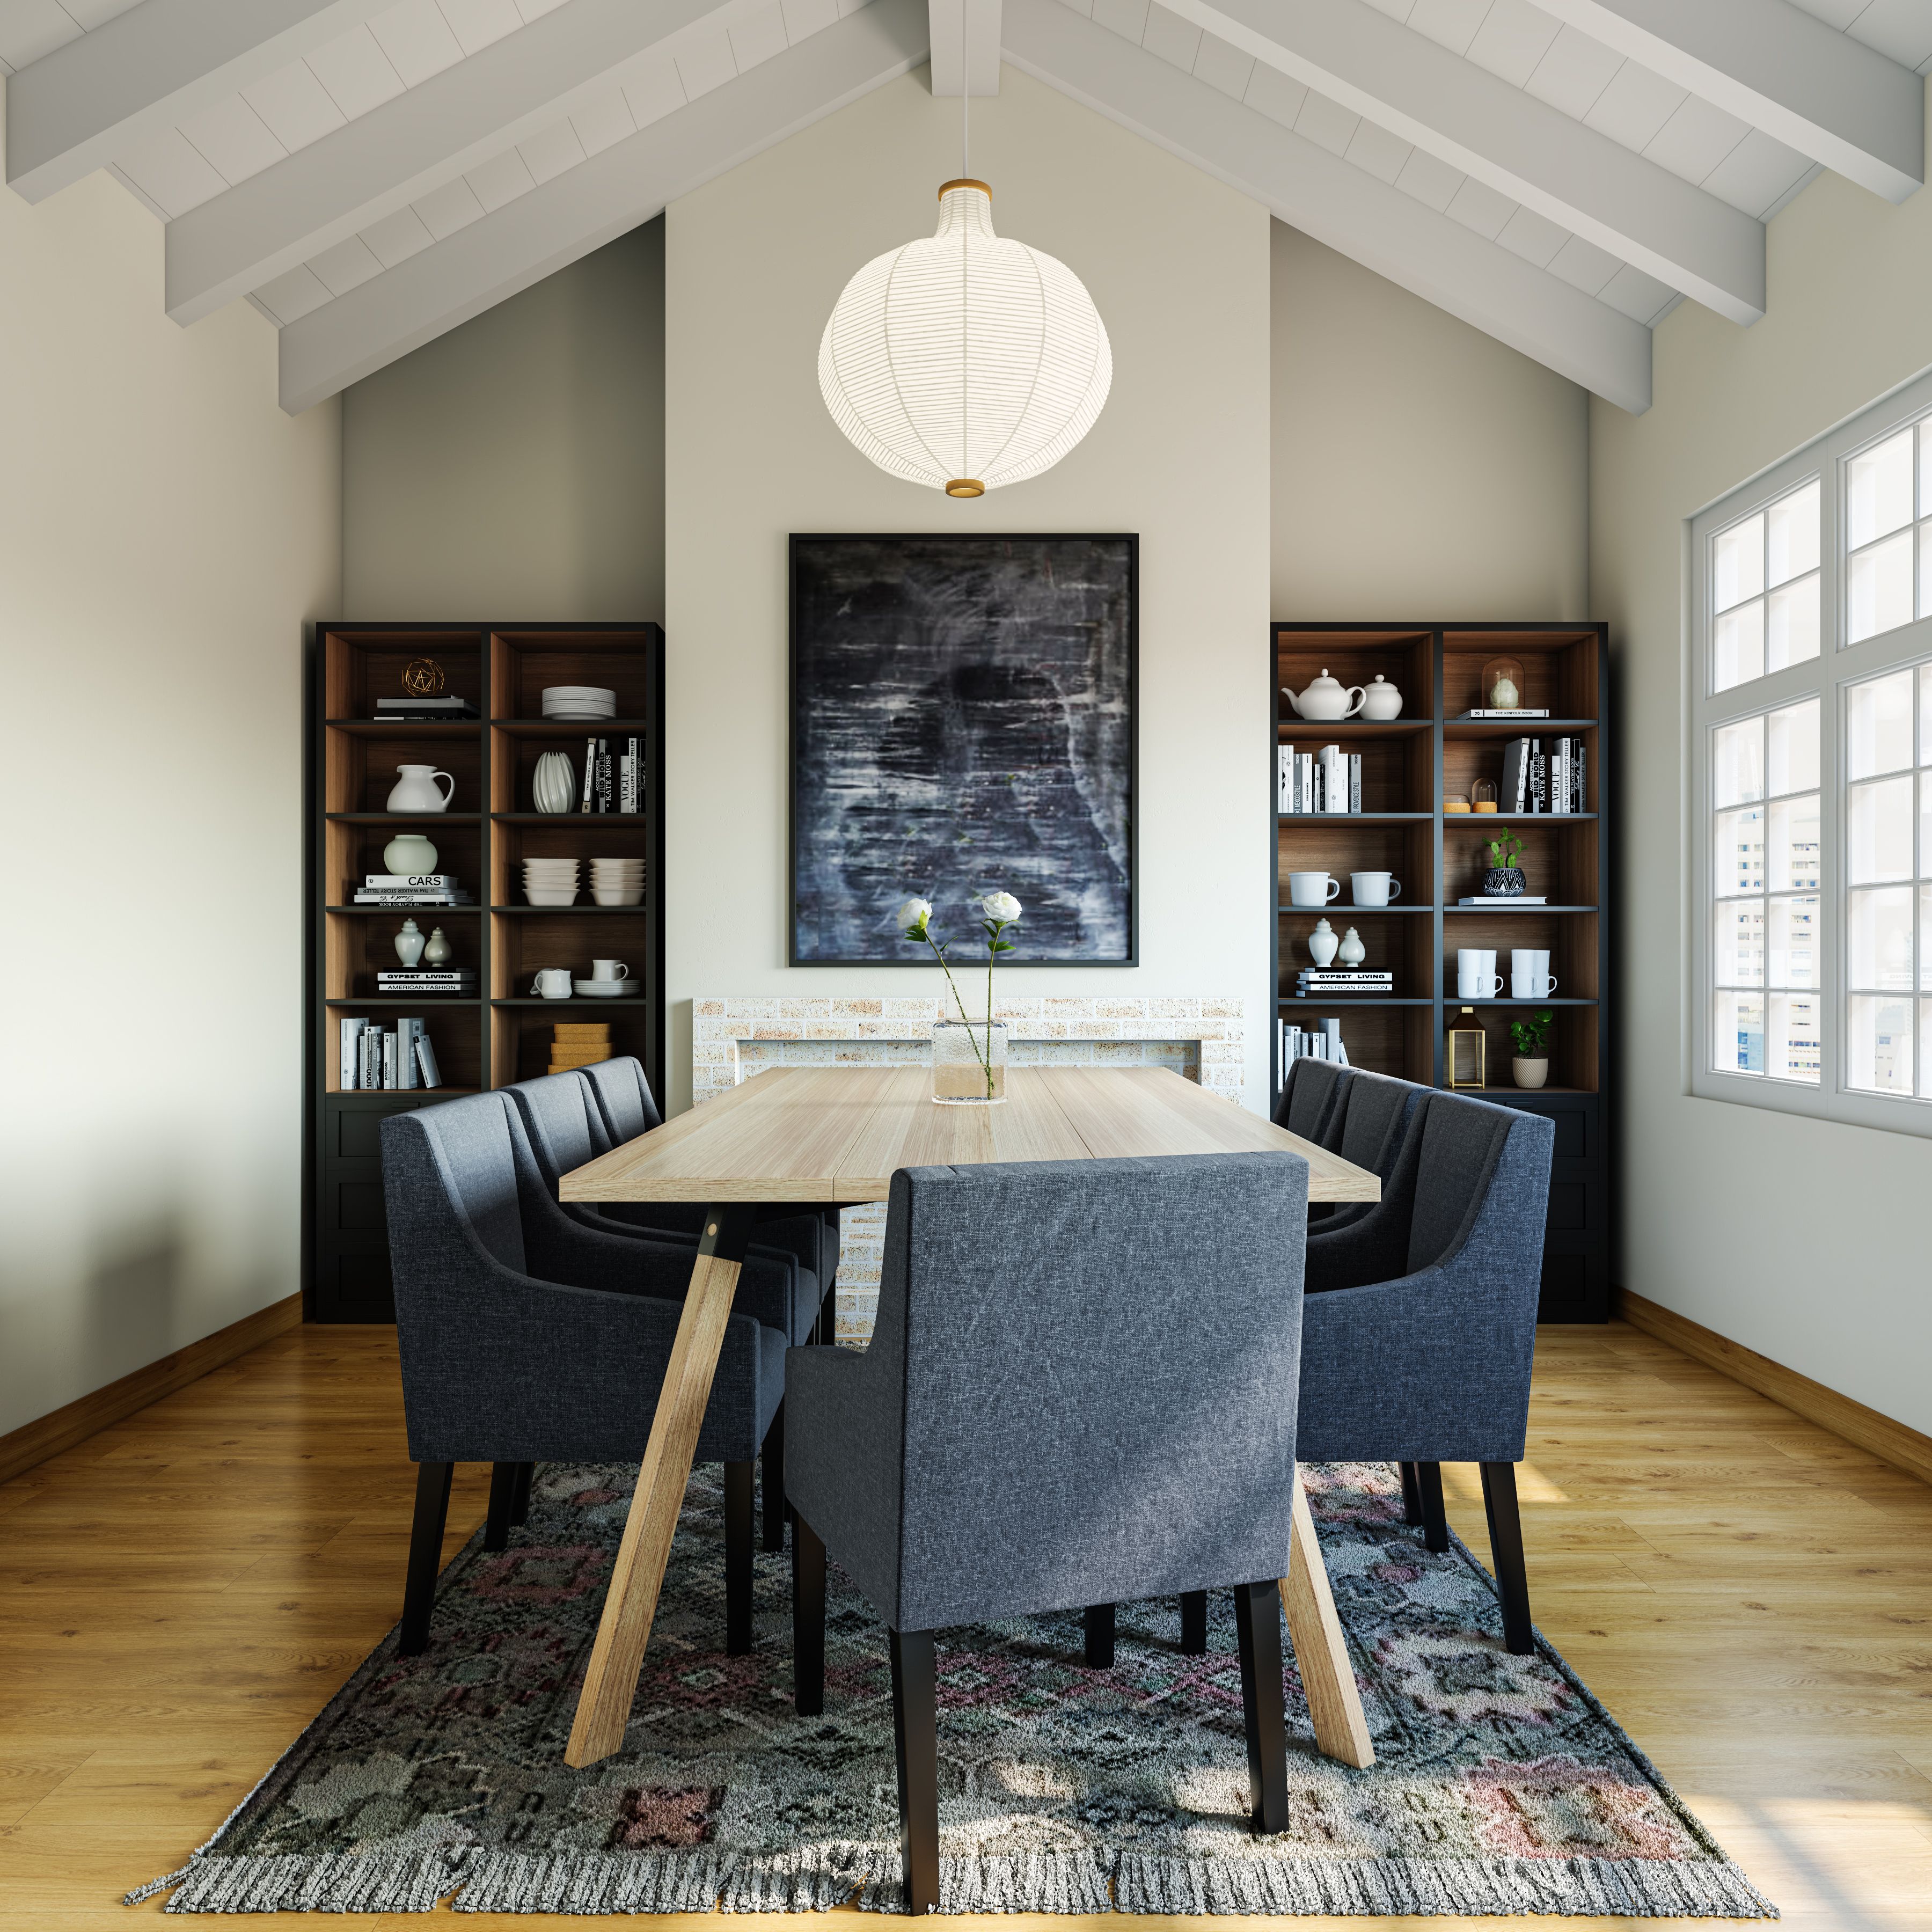 Contemporary Dining Room Design With Two Crockery Units